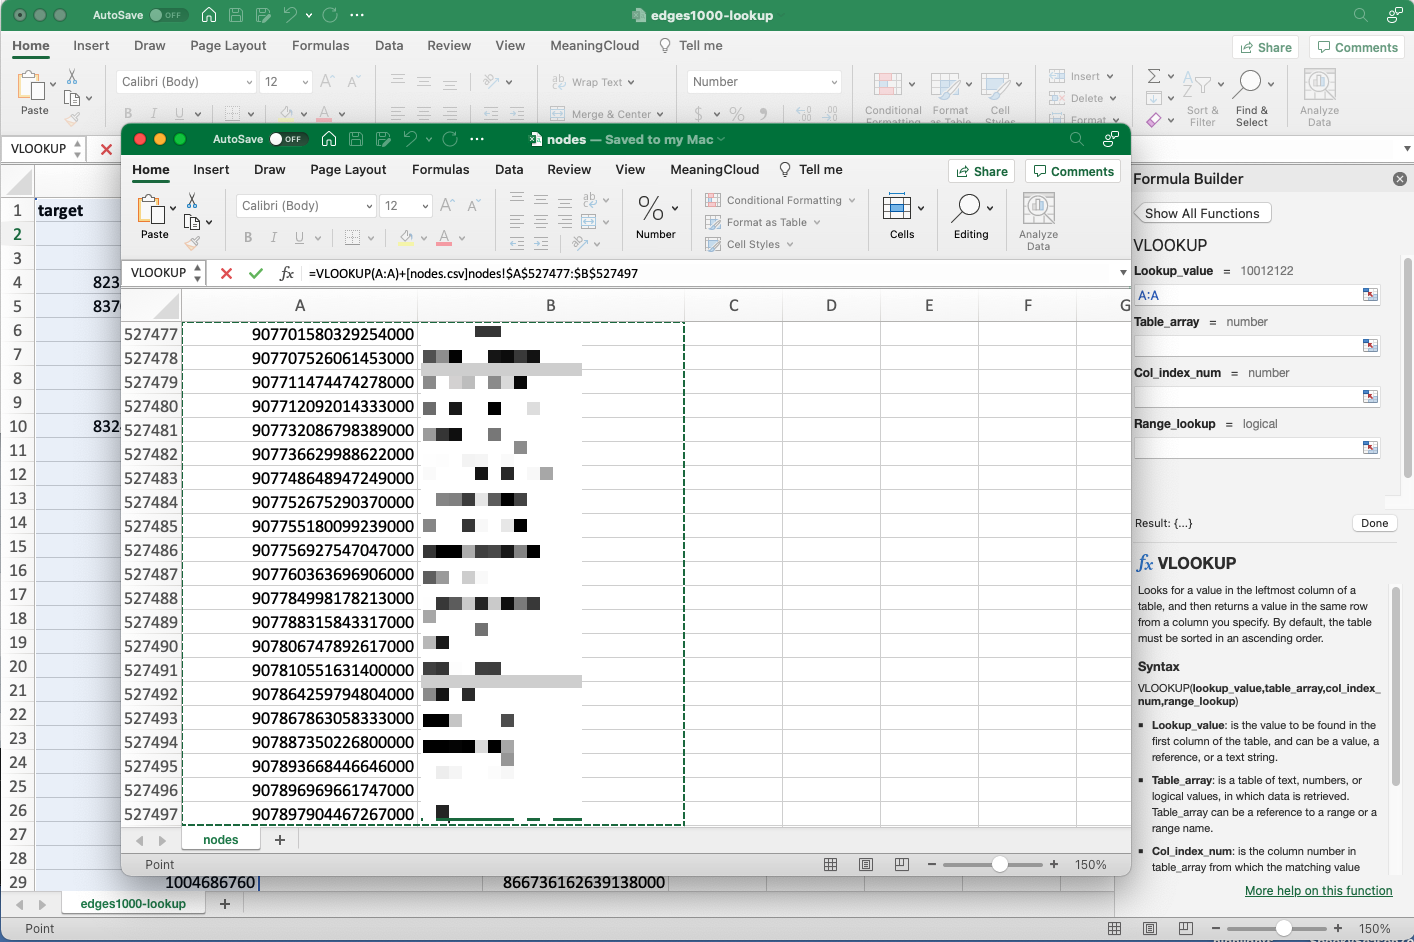 Highlight all the values in the second spreadsheet.